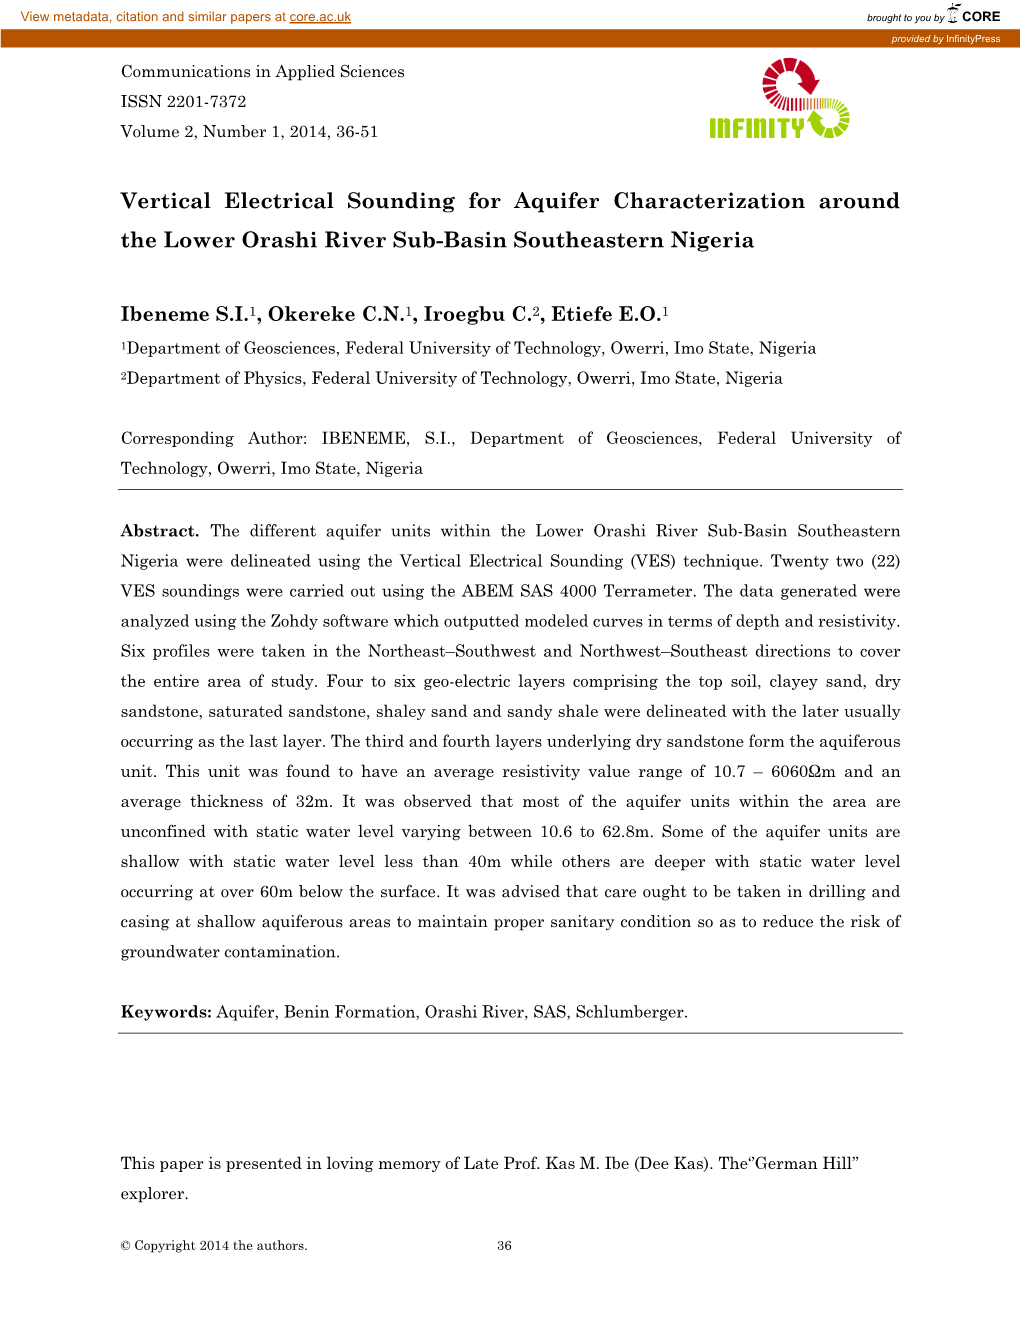 Vertical Electrical Sounding for Aquifer Characterization Around the Lower Orashi River Sub-Basin Southeastern Nigeria